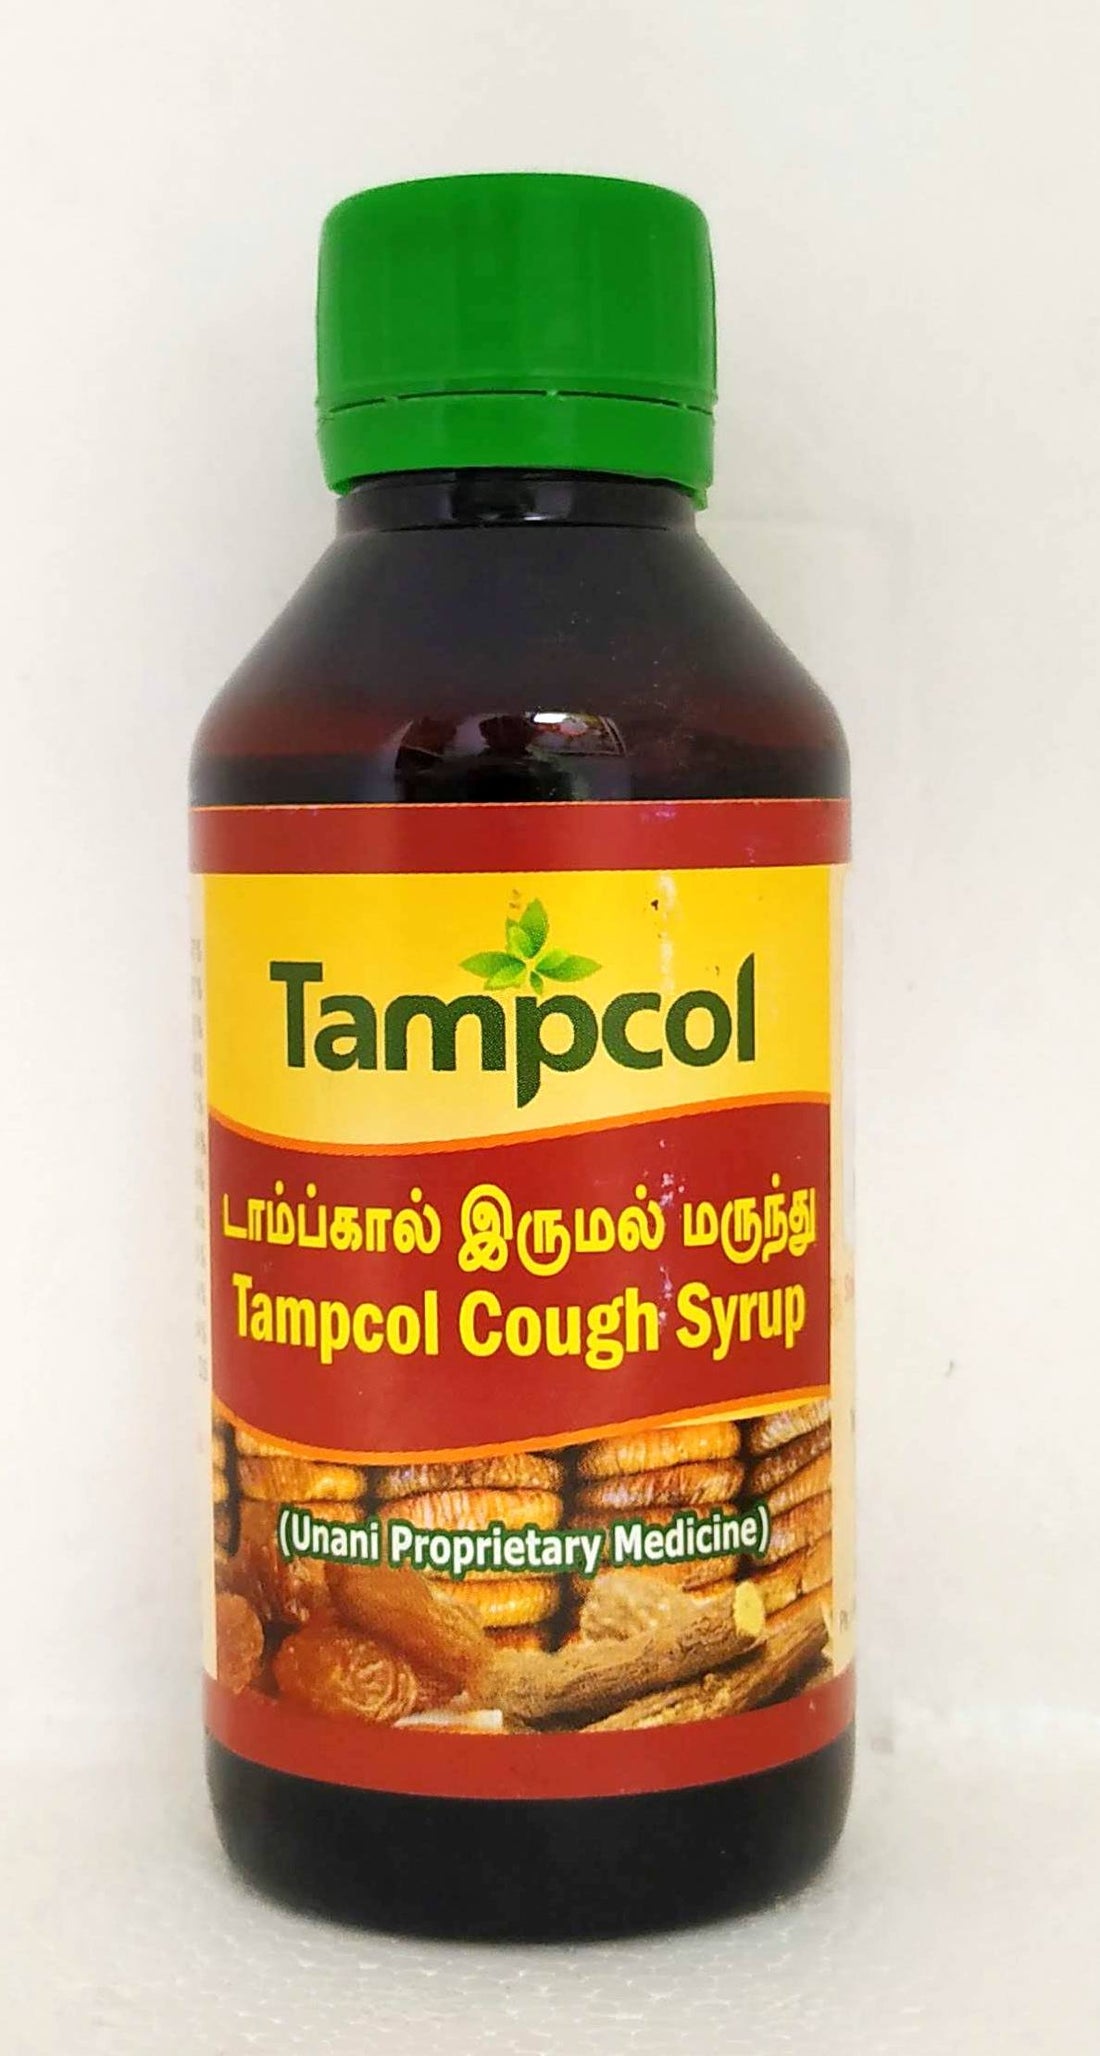 Shop Tampcol Cough Syrup 100ml at price 46.00 from Tampcol Online - Ayush Care